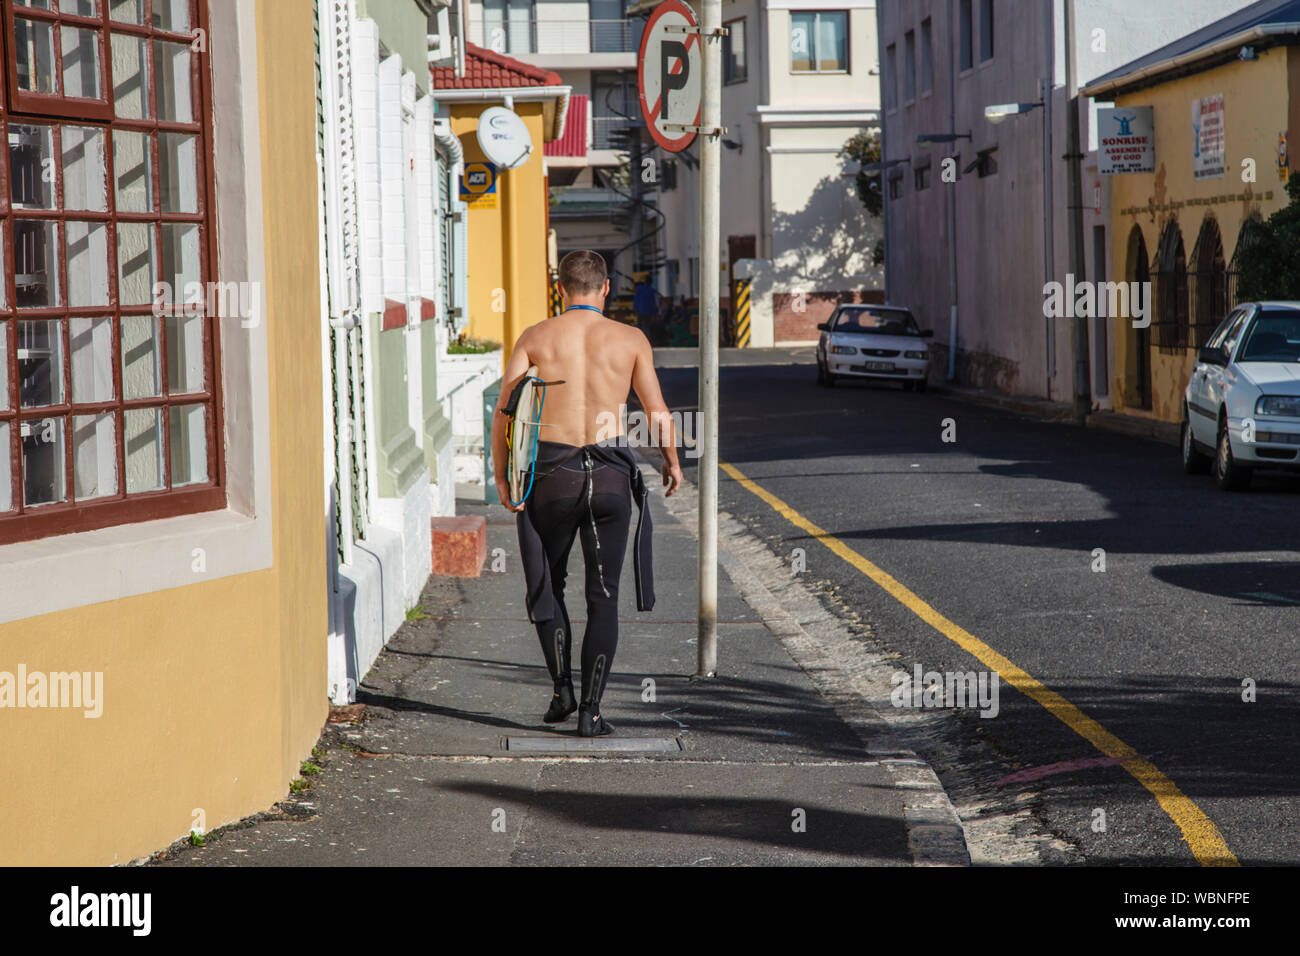 Surfer walking through the streets of Muizenberg, South Africa Stock Photo